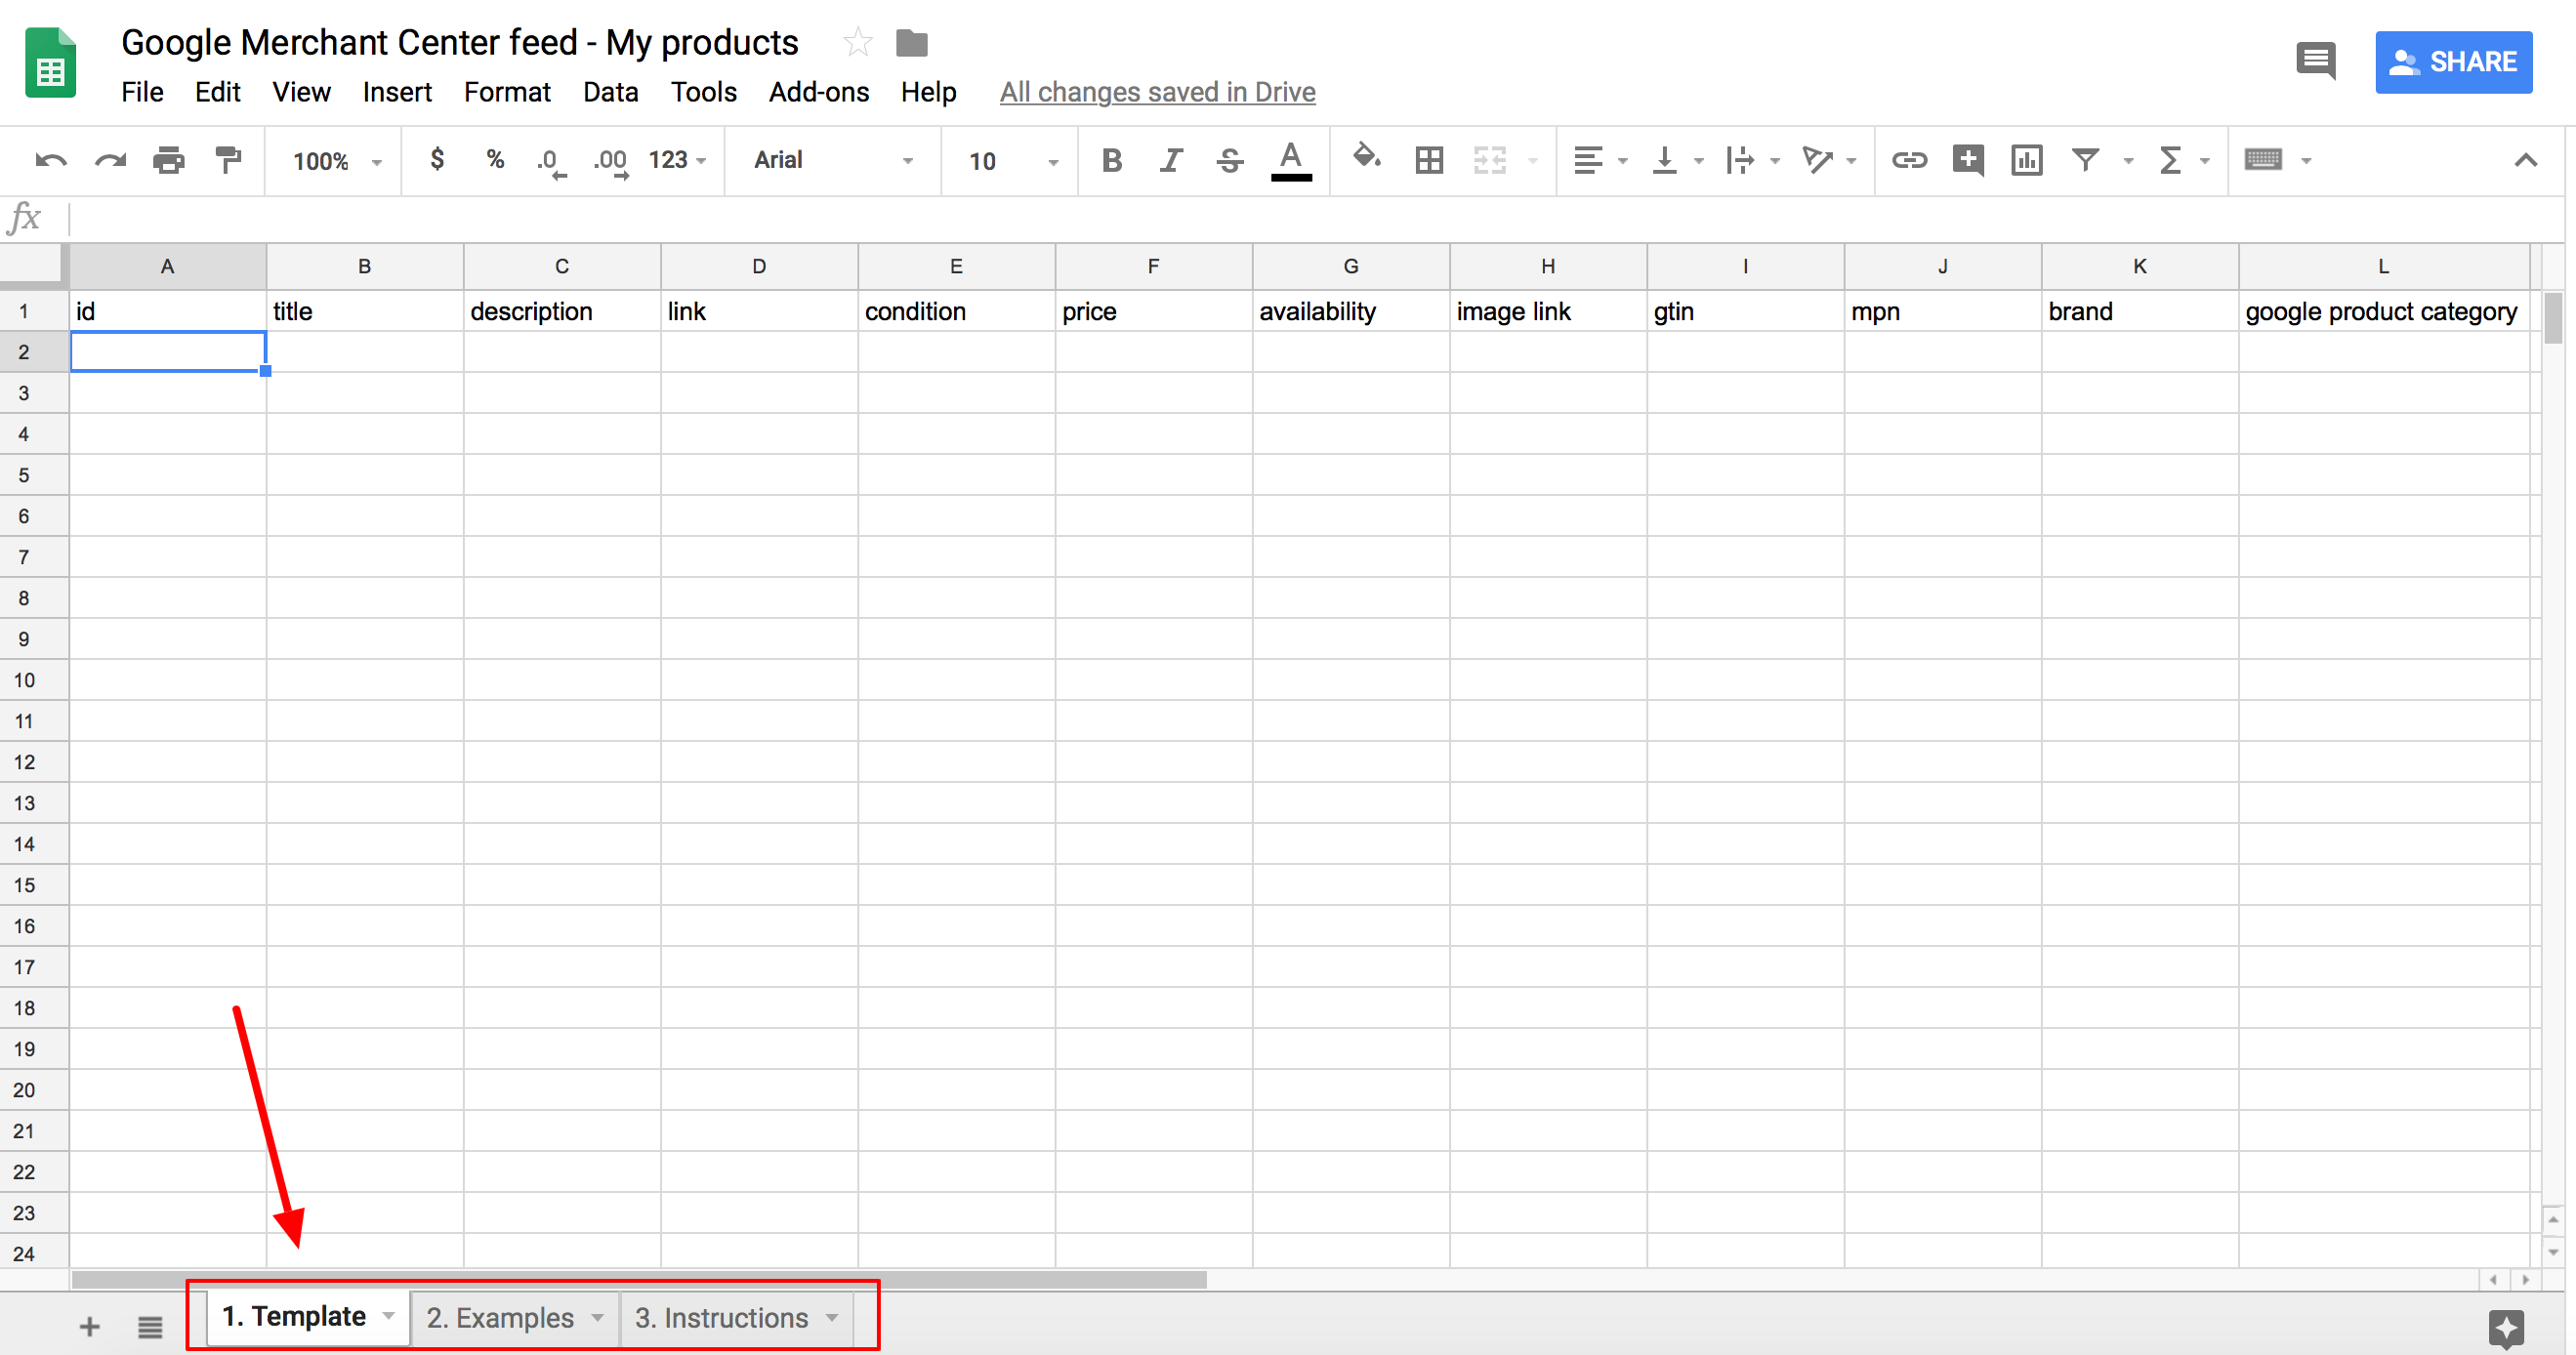 Upload your products to the Google Merchant Center with Google Sheets